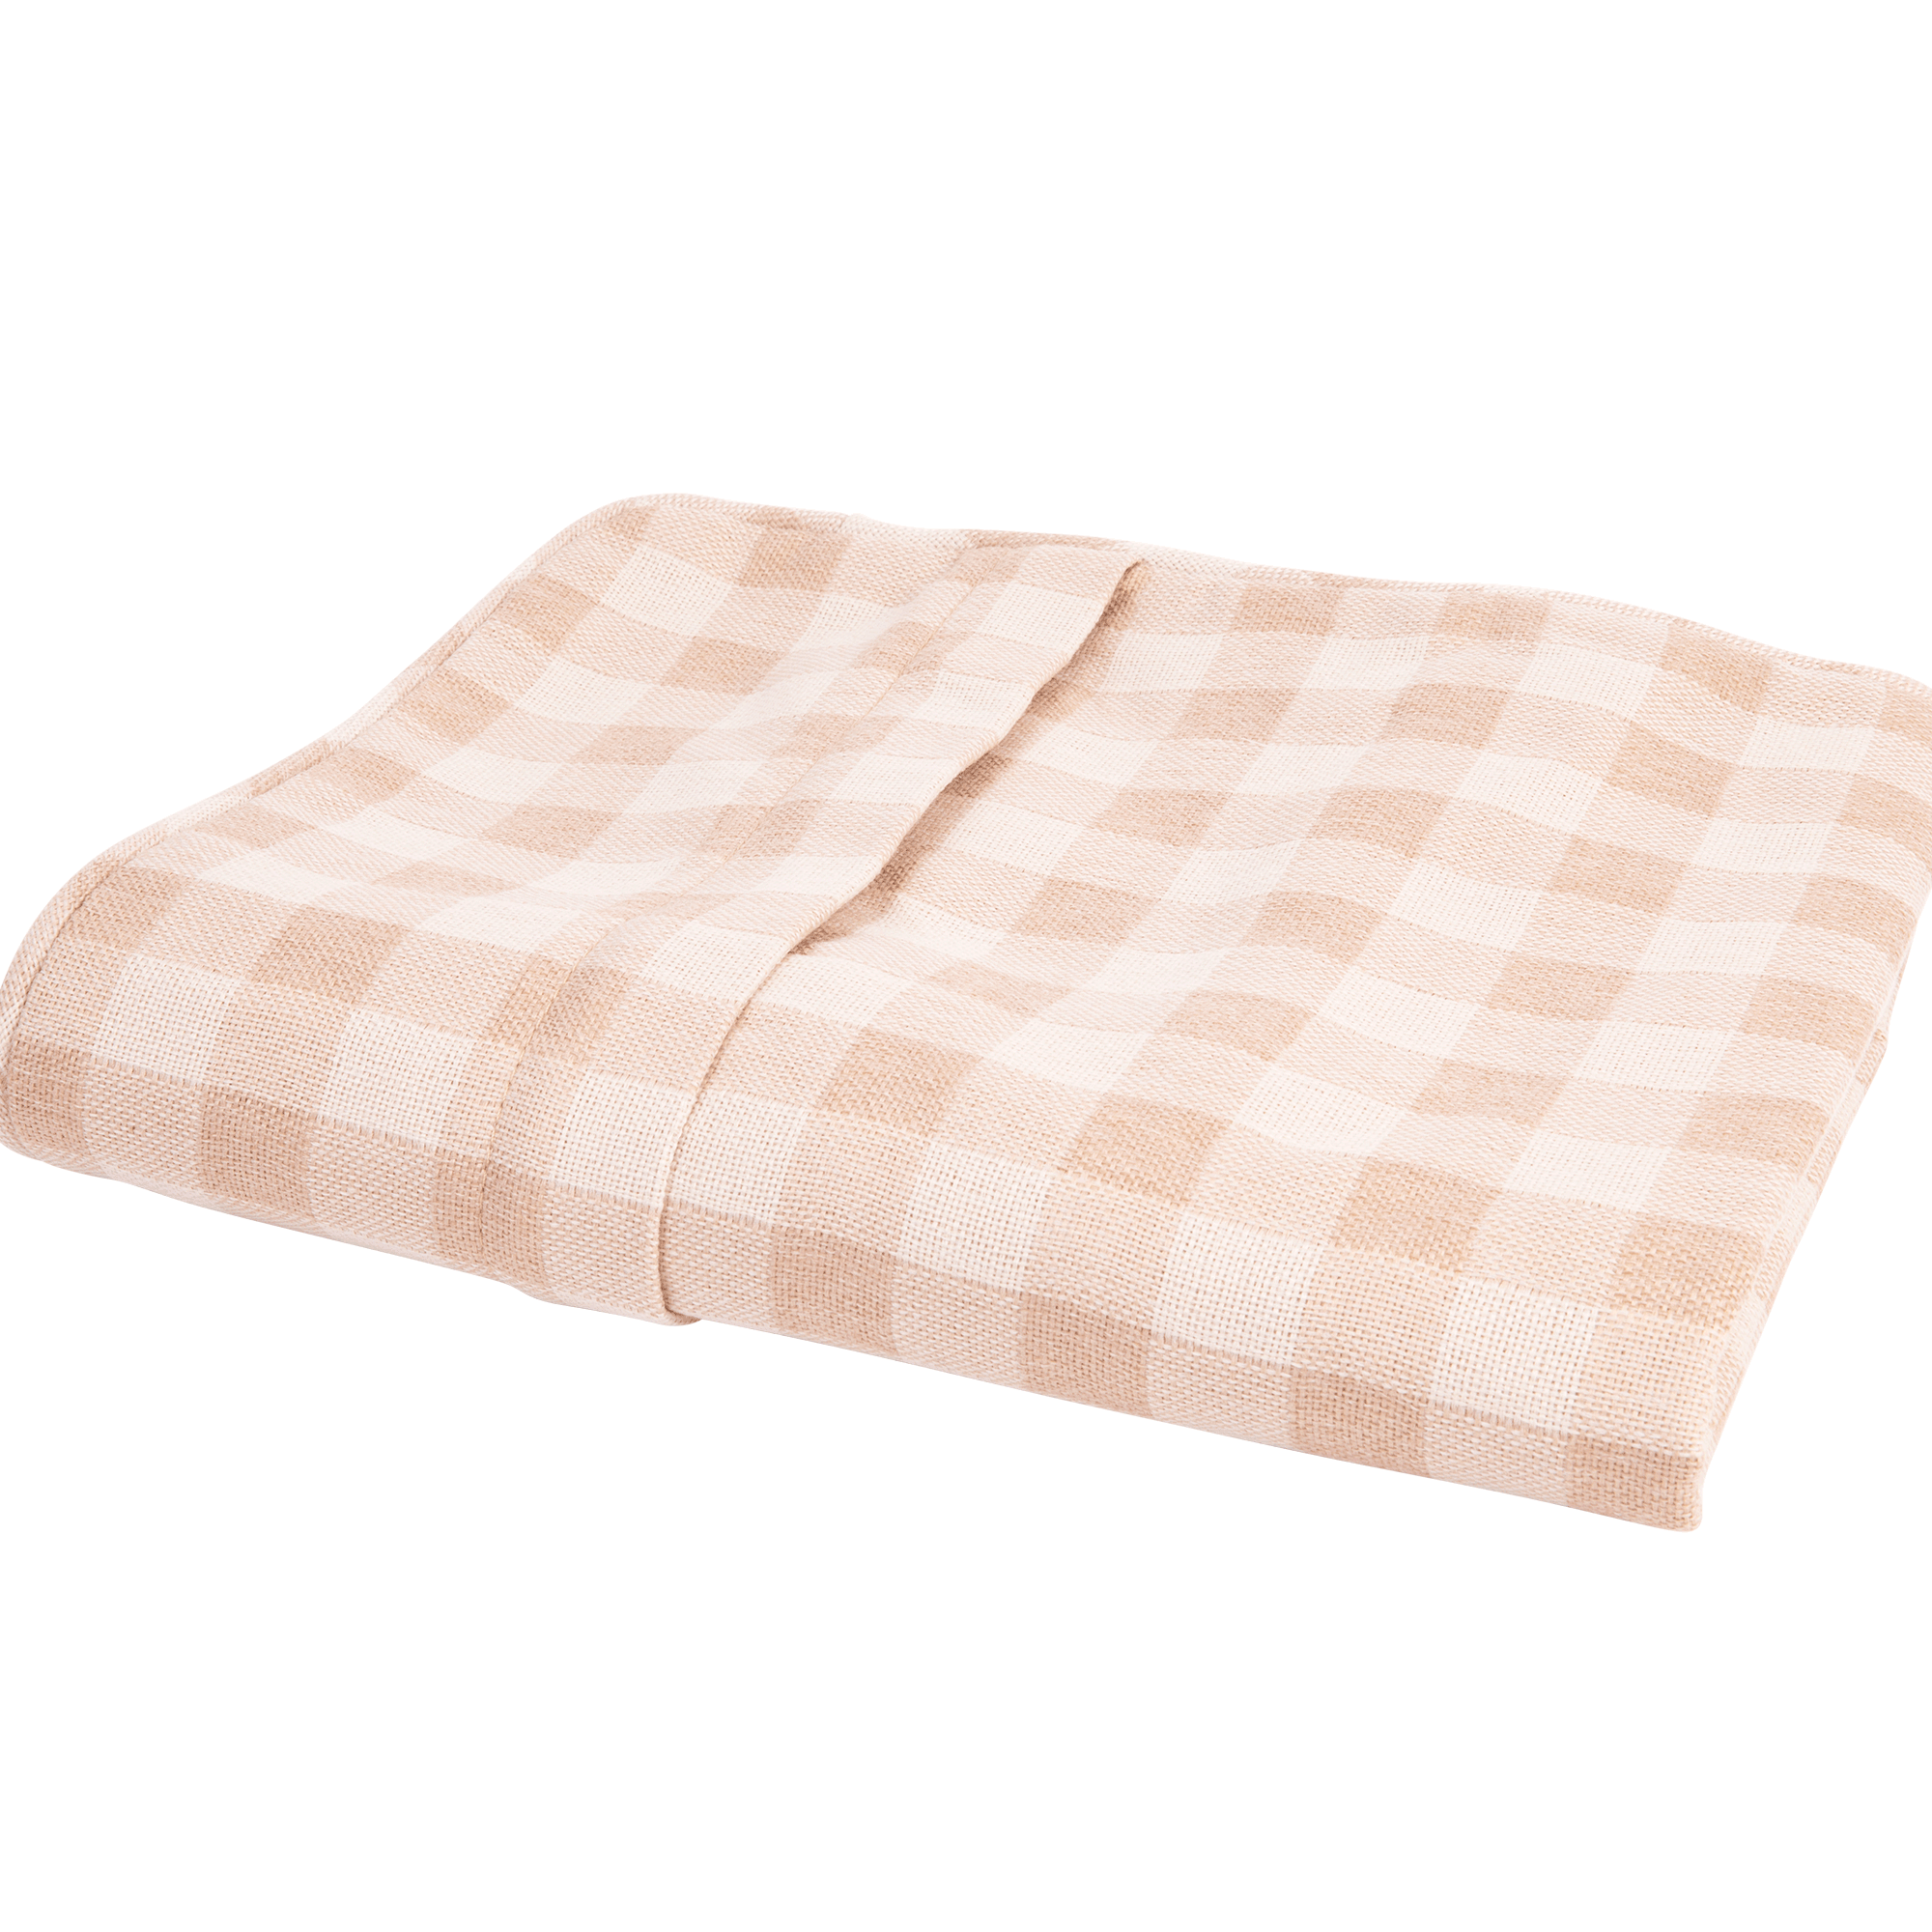 Large Red Buffalo Check Envelope Bed Cover | Harry Barker, Large / Buffalo Check Tan